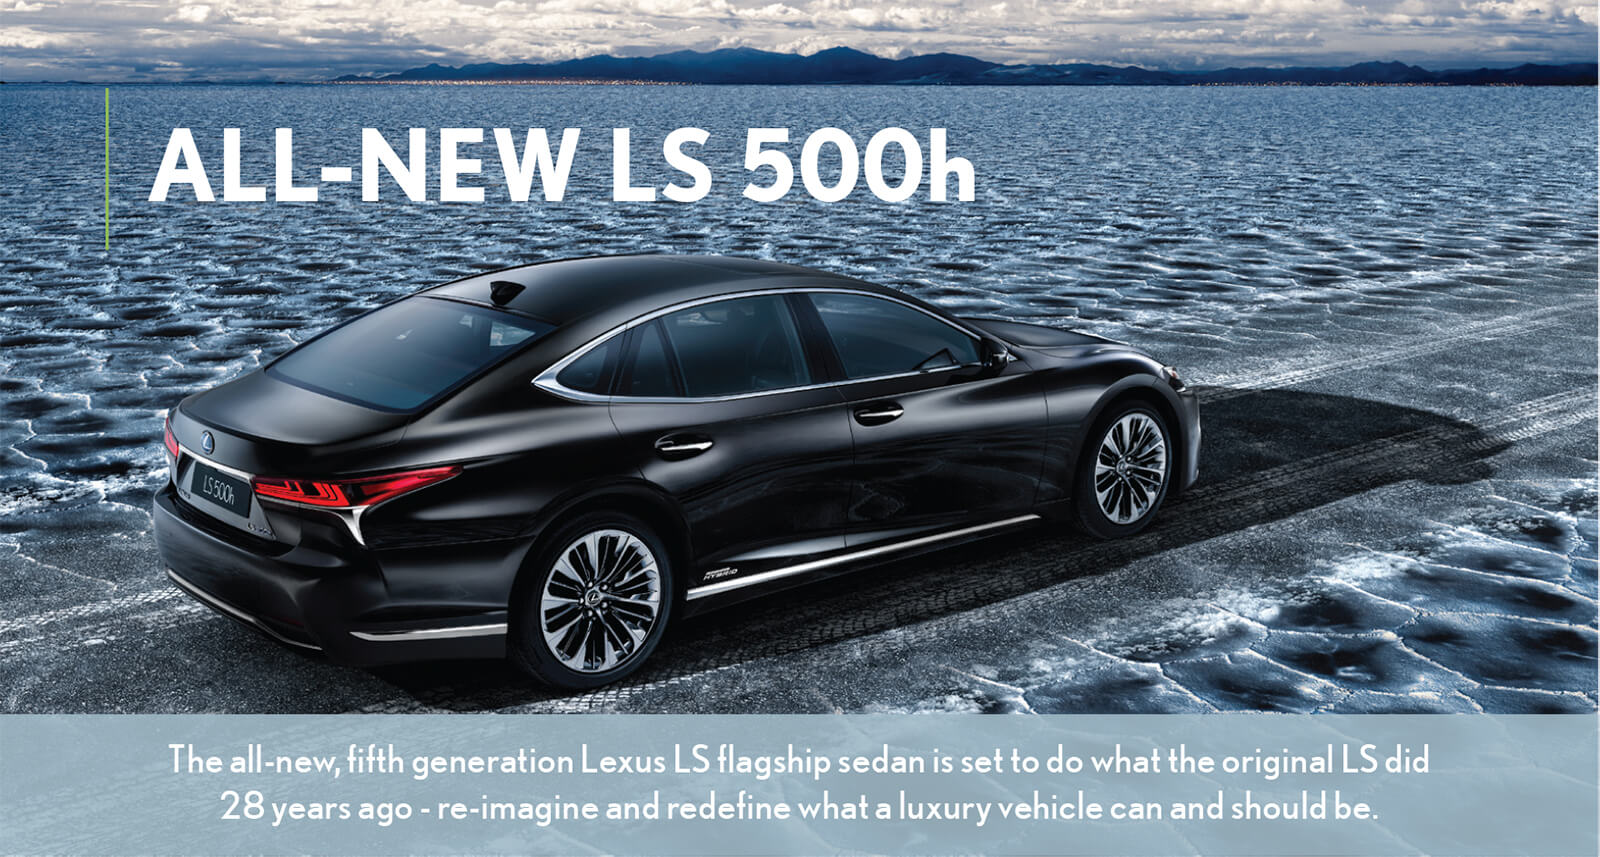 All New LS 500h